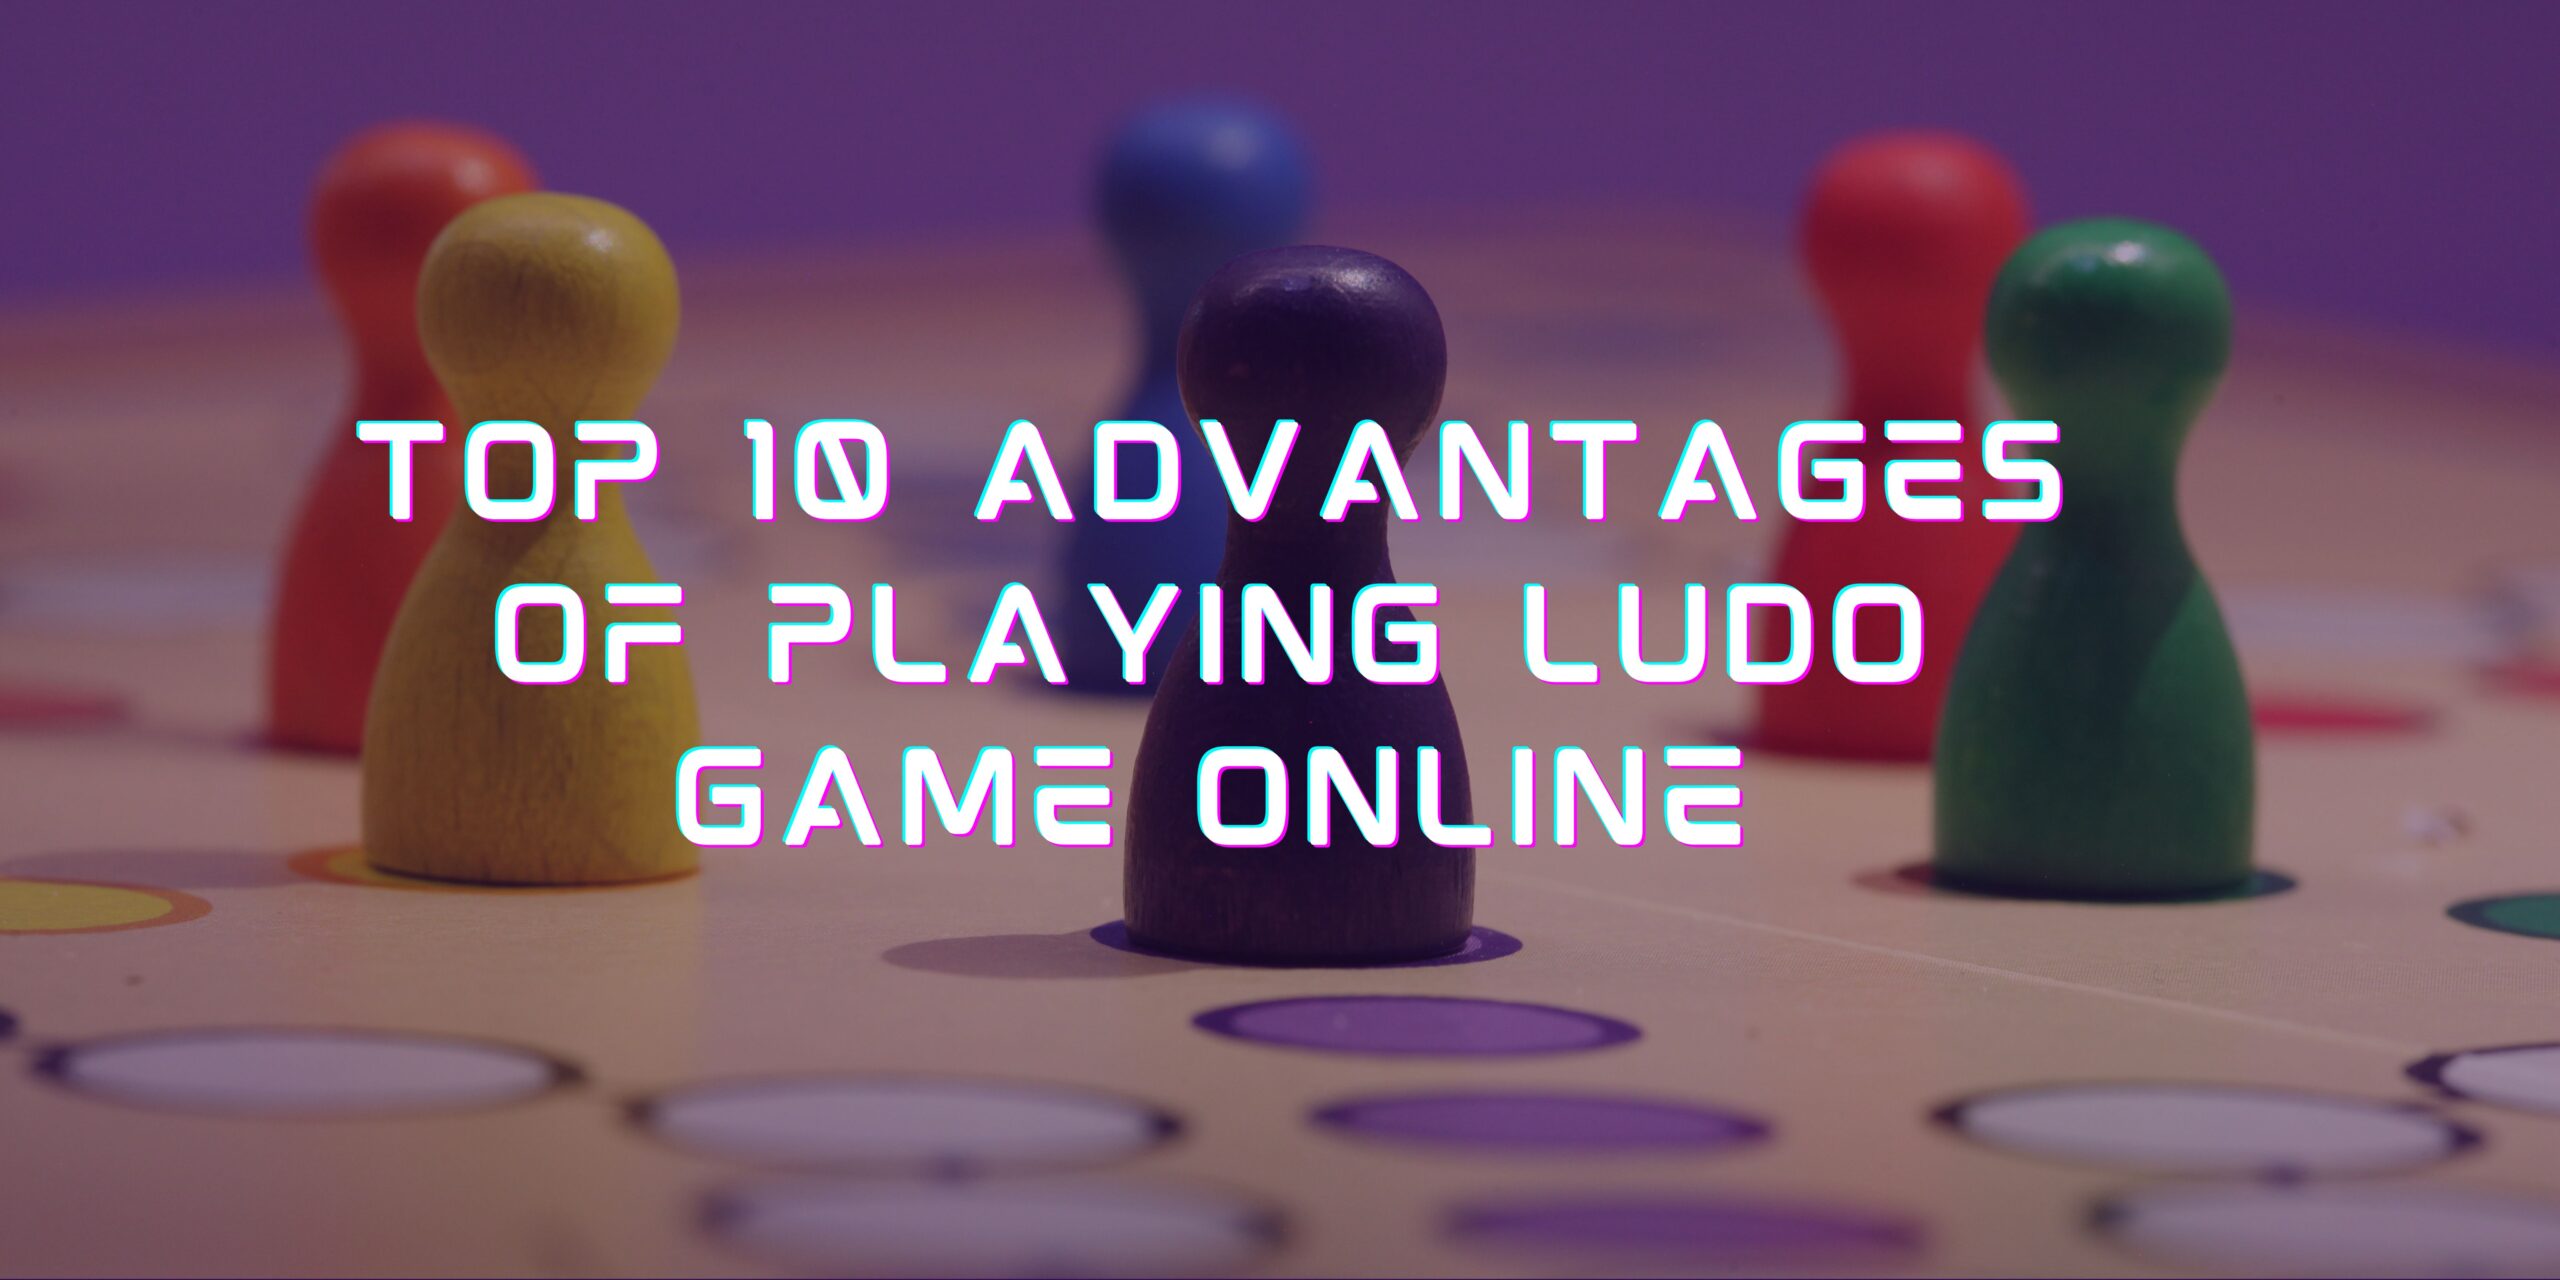 Top 10 Advantages of Playing Ludo Game Online